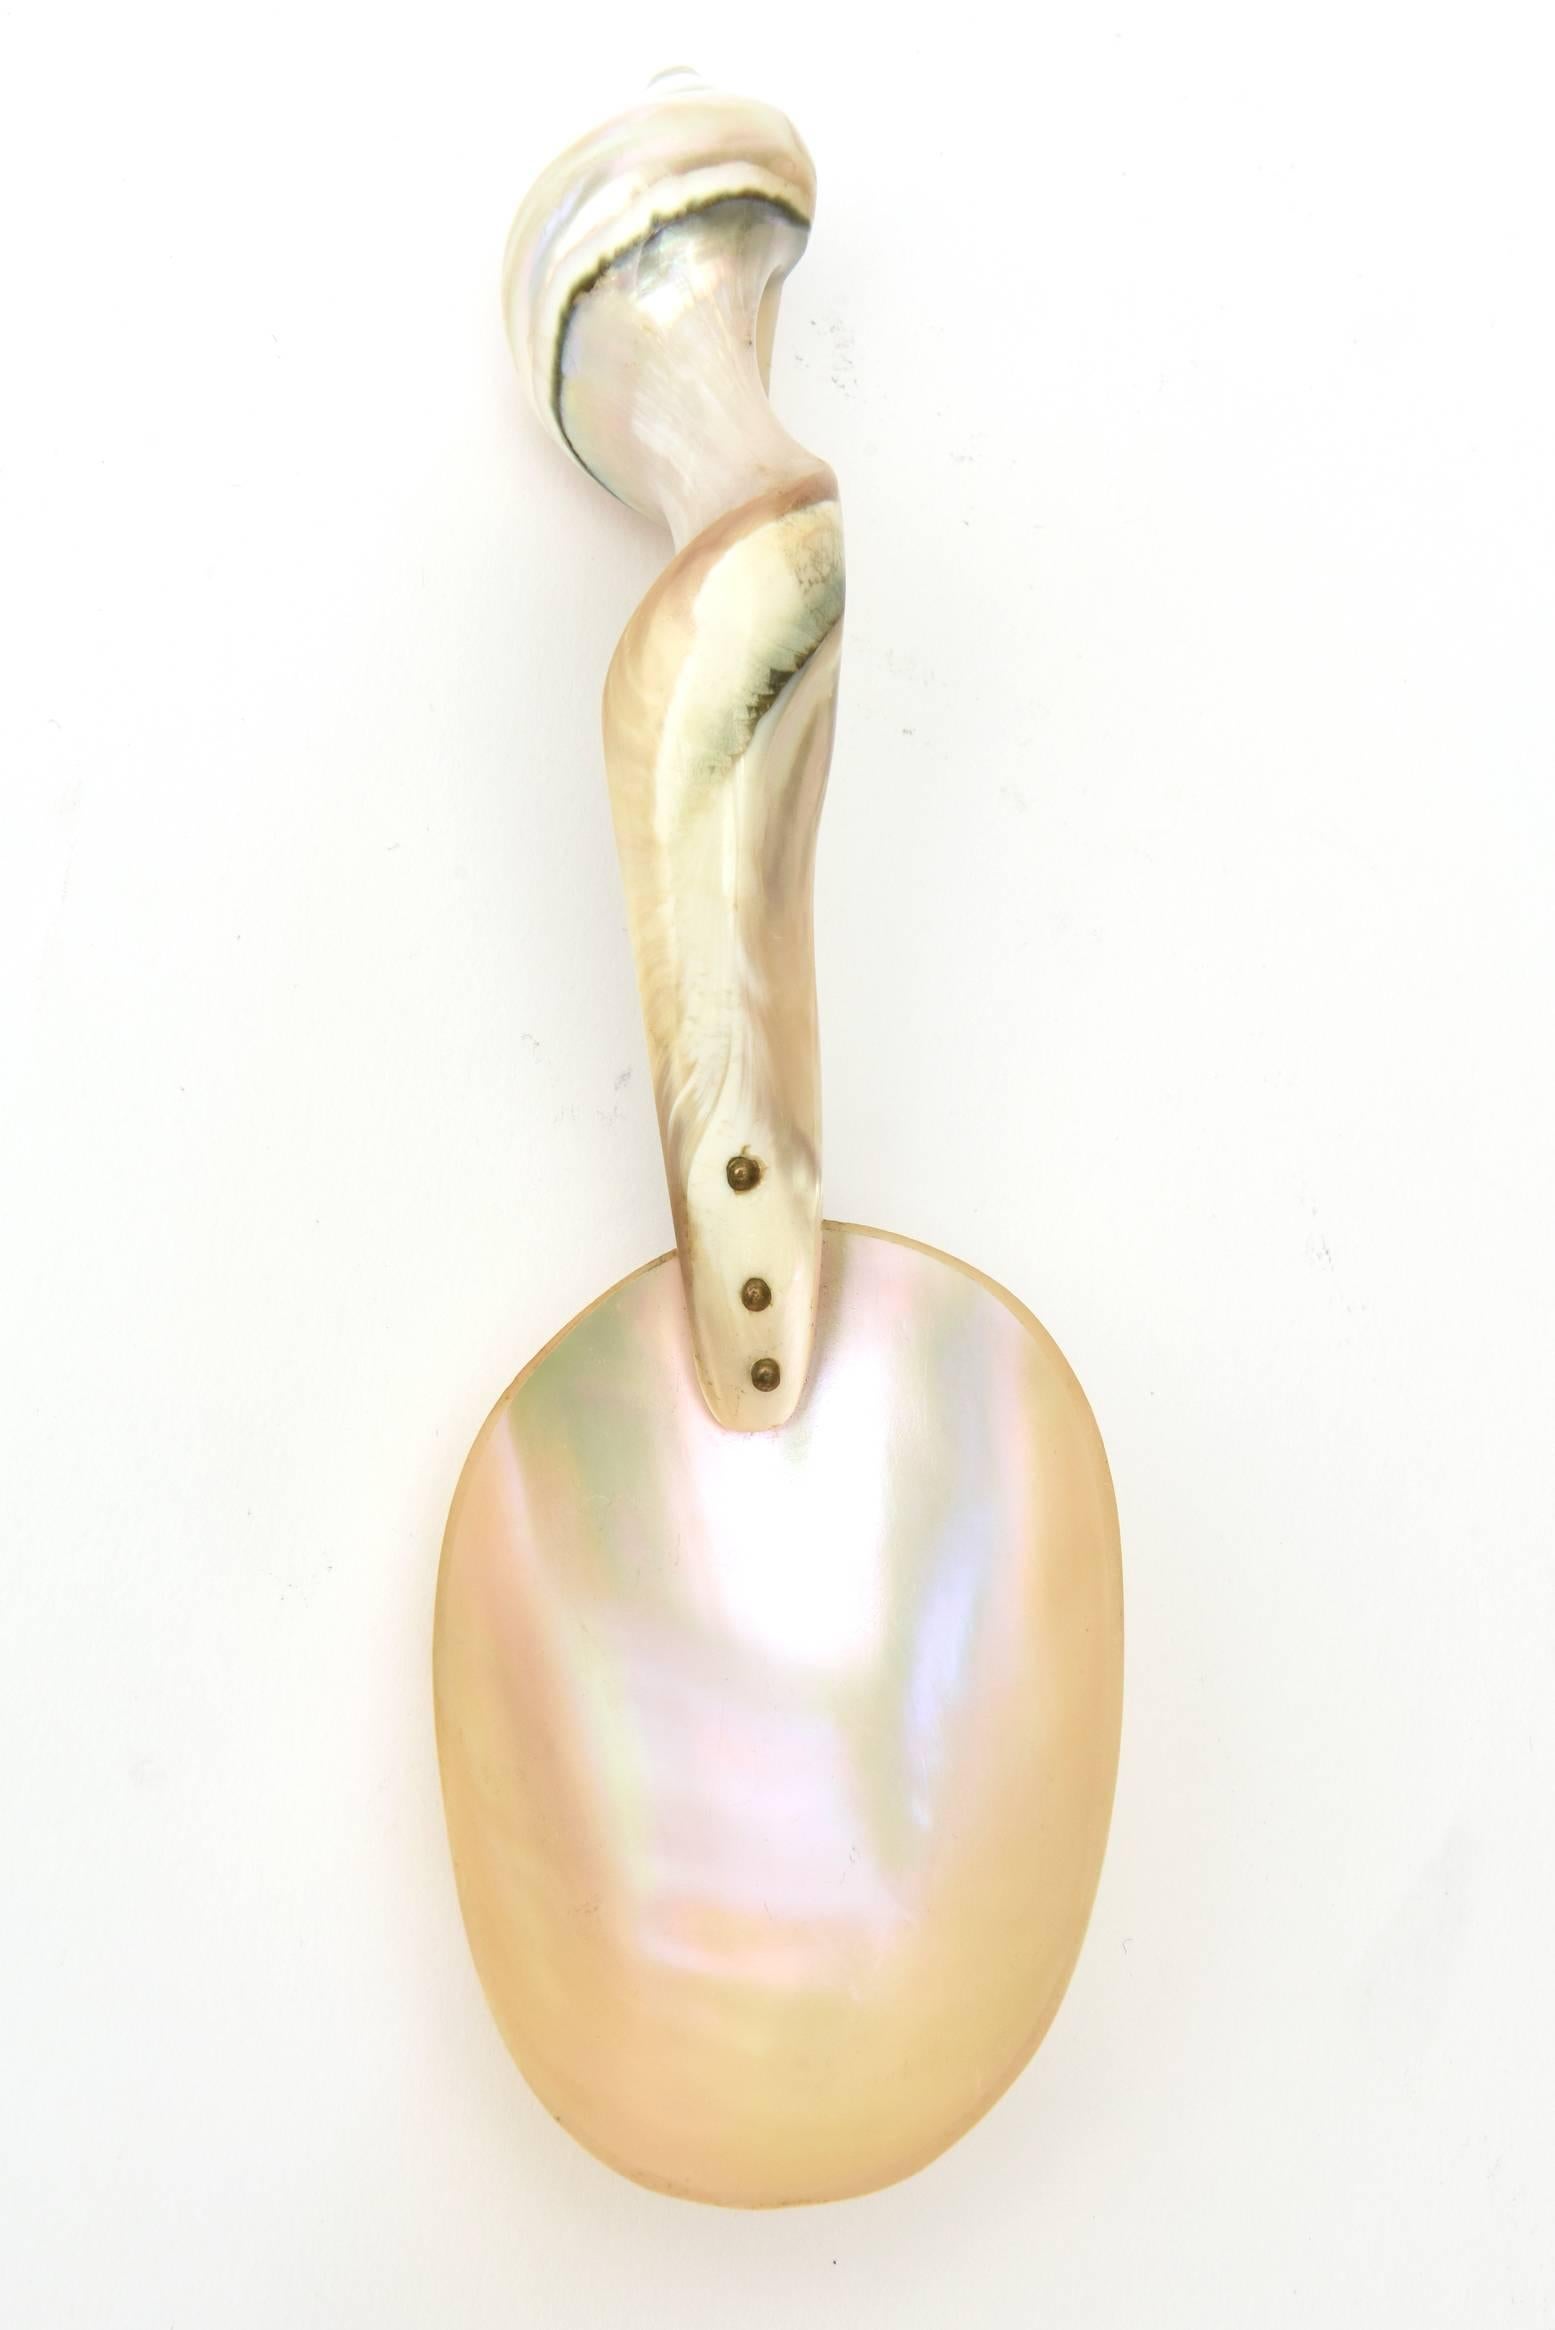 American Mother of Pearl Organic Sculptural Serving Spoon For Sale